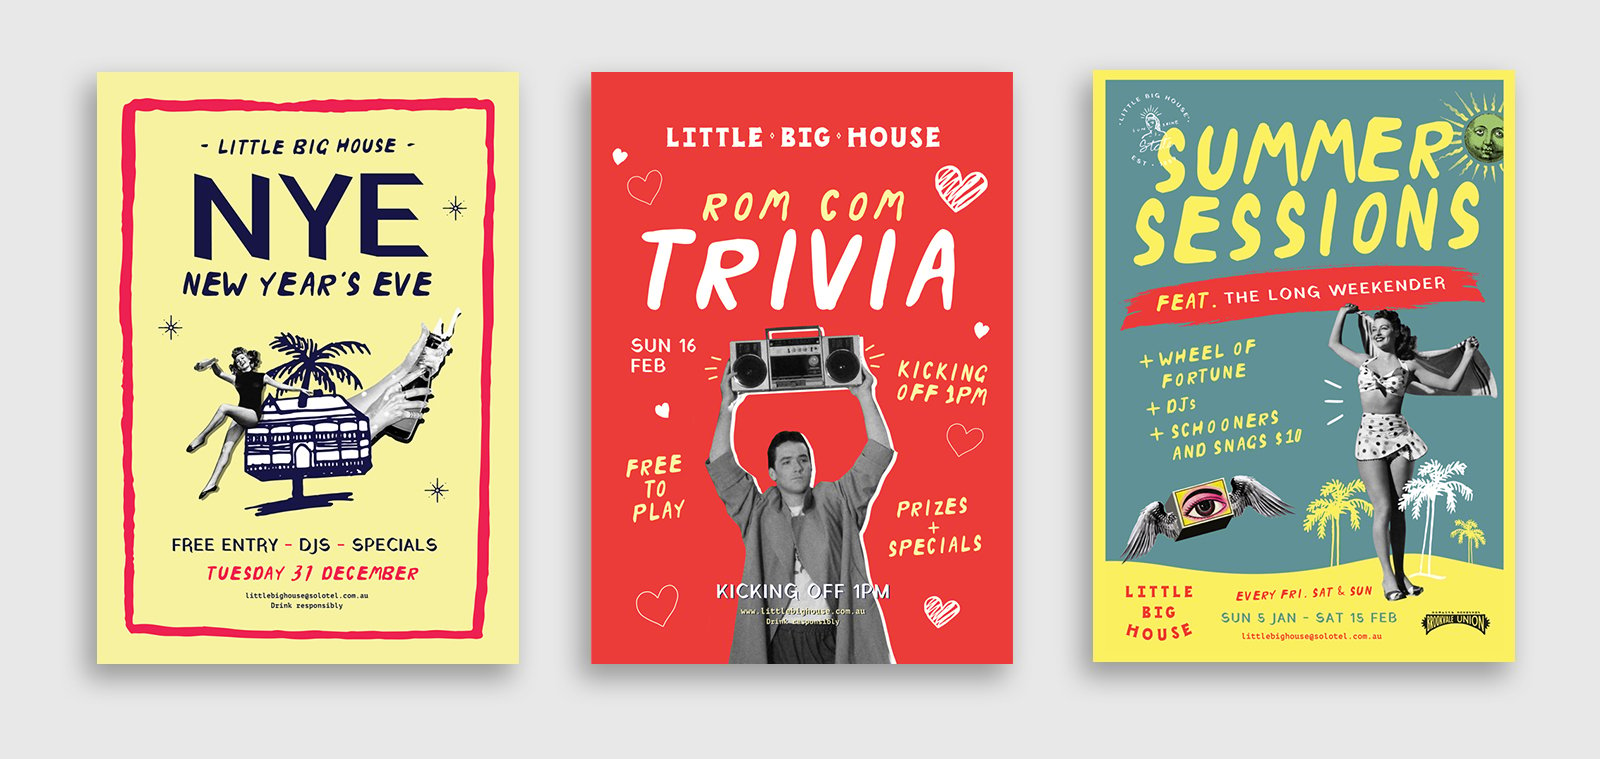 three different poster designs for events at the little big house venue in queensland